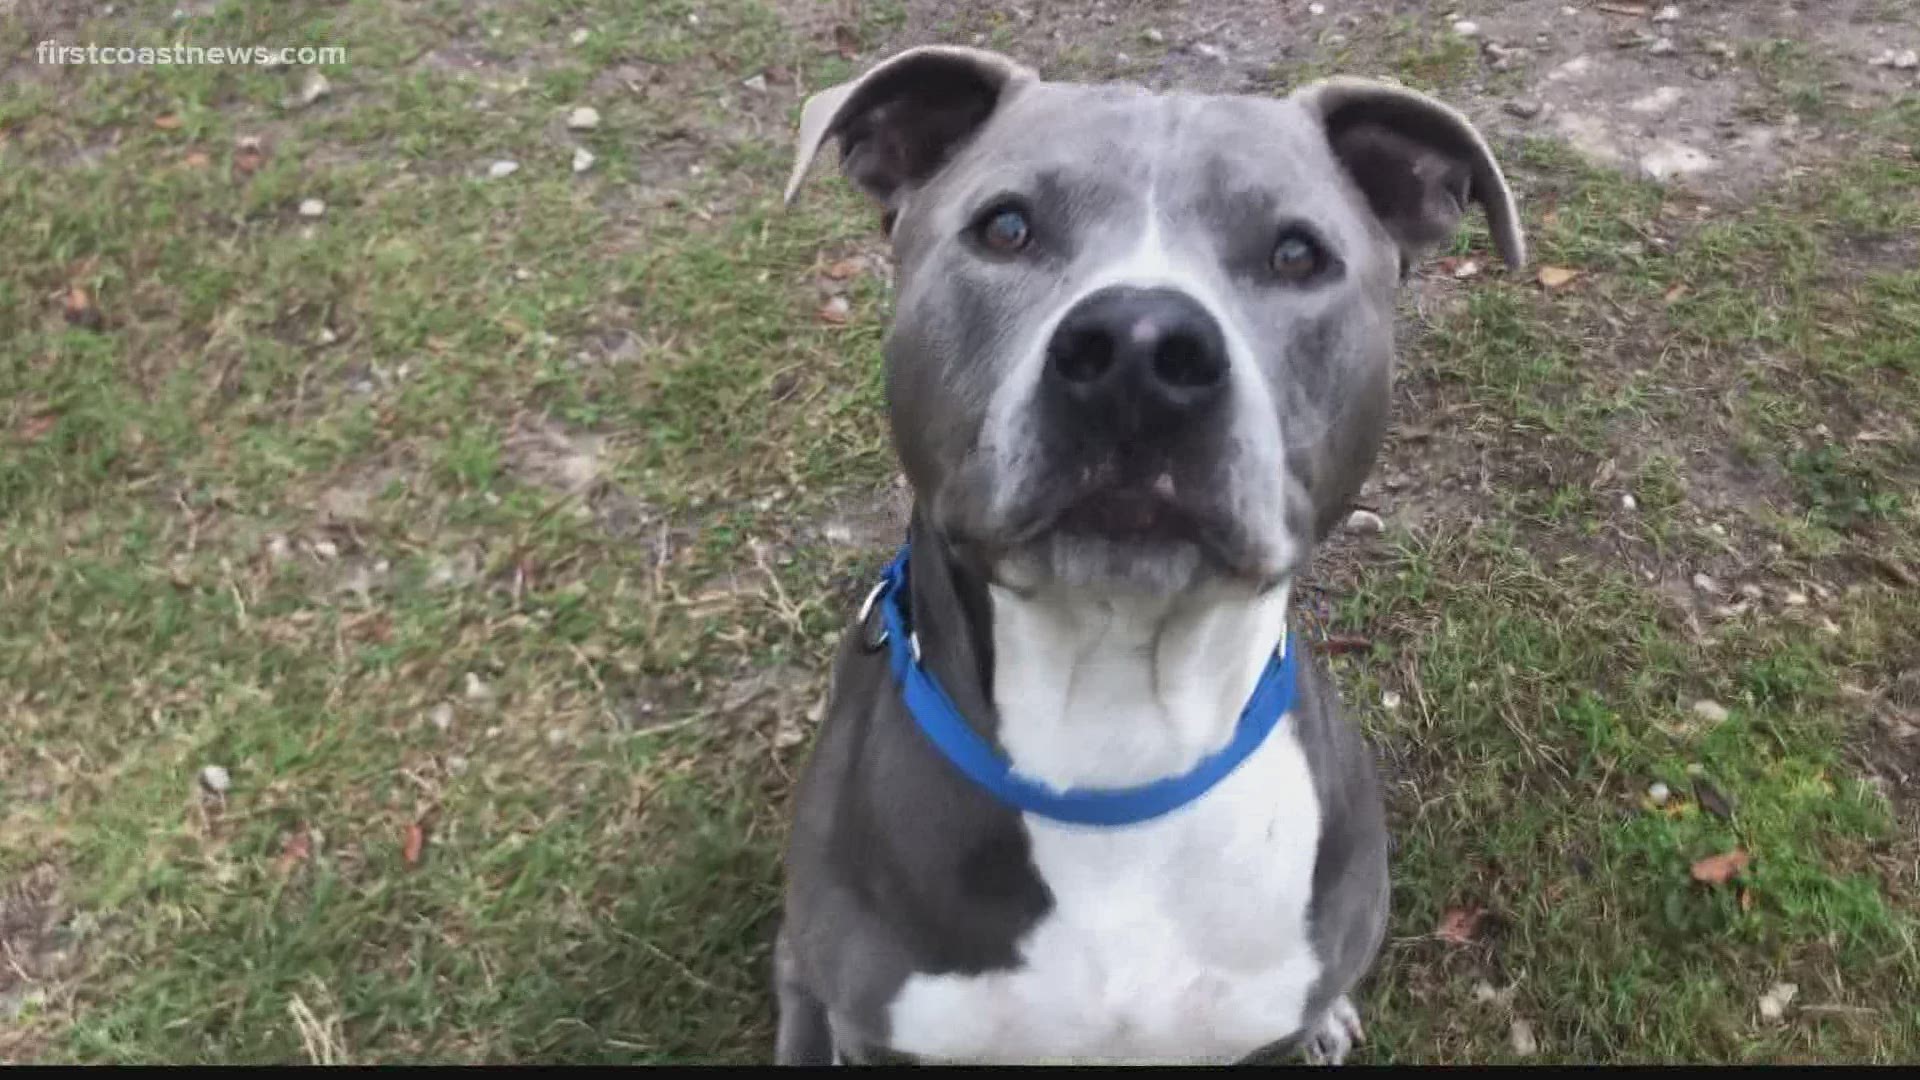 Hank is crate trained and house trained and knows basic commands like "sit" and "shake," the Jacksonville Humane Society says.